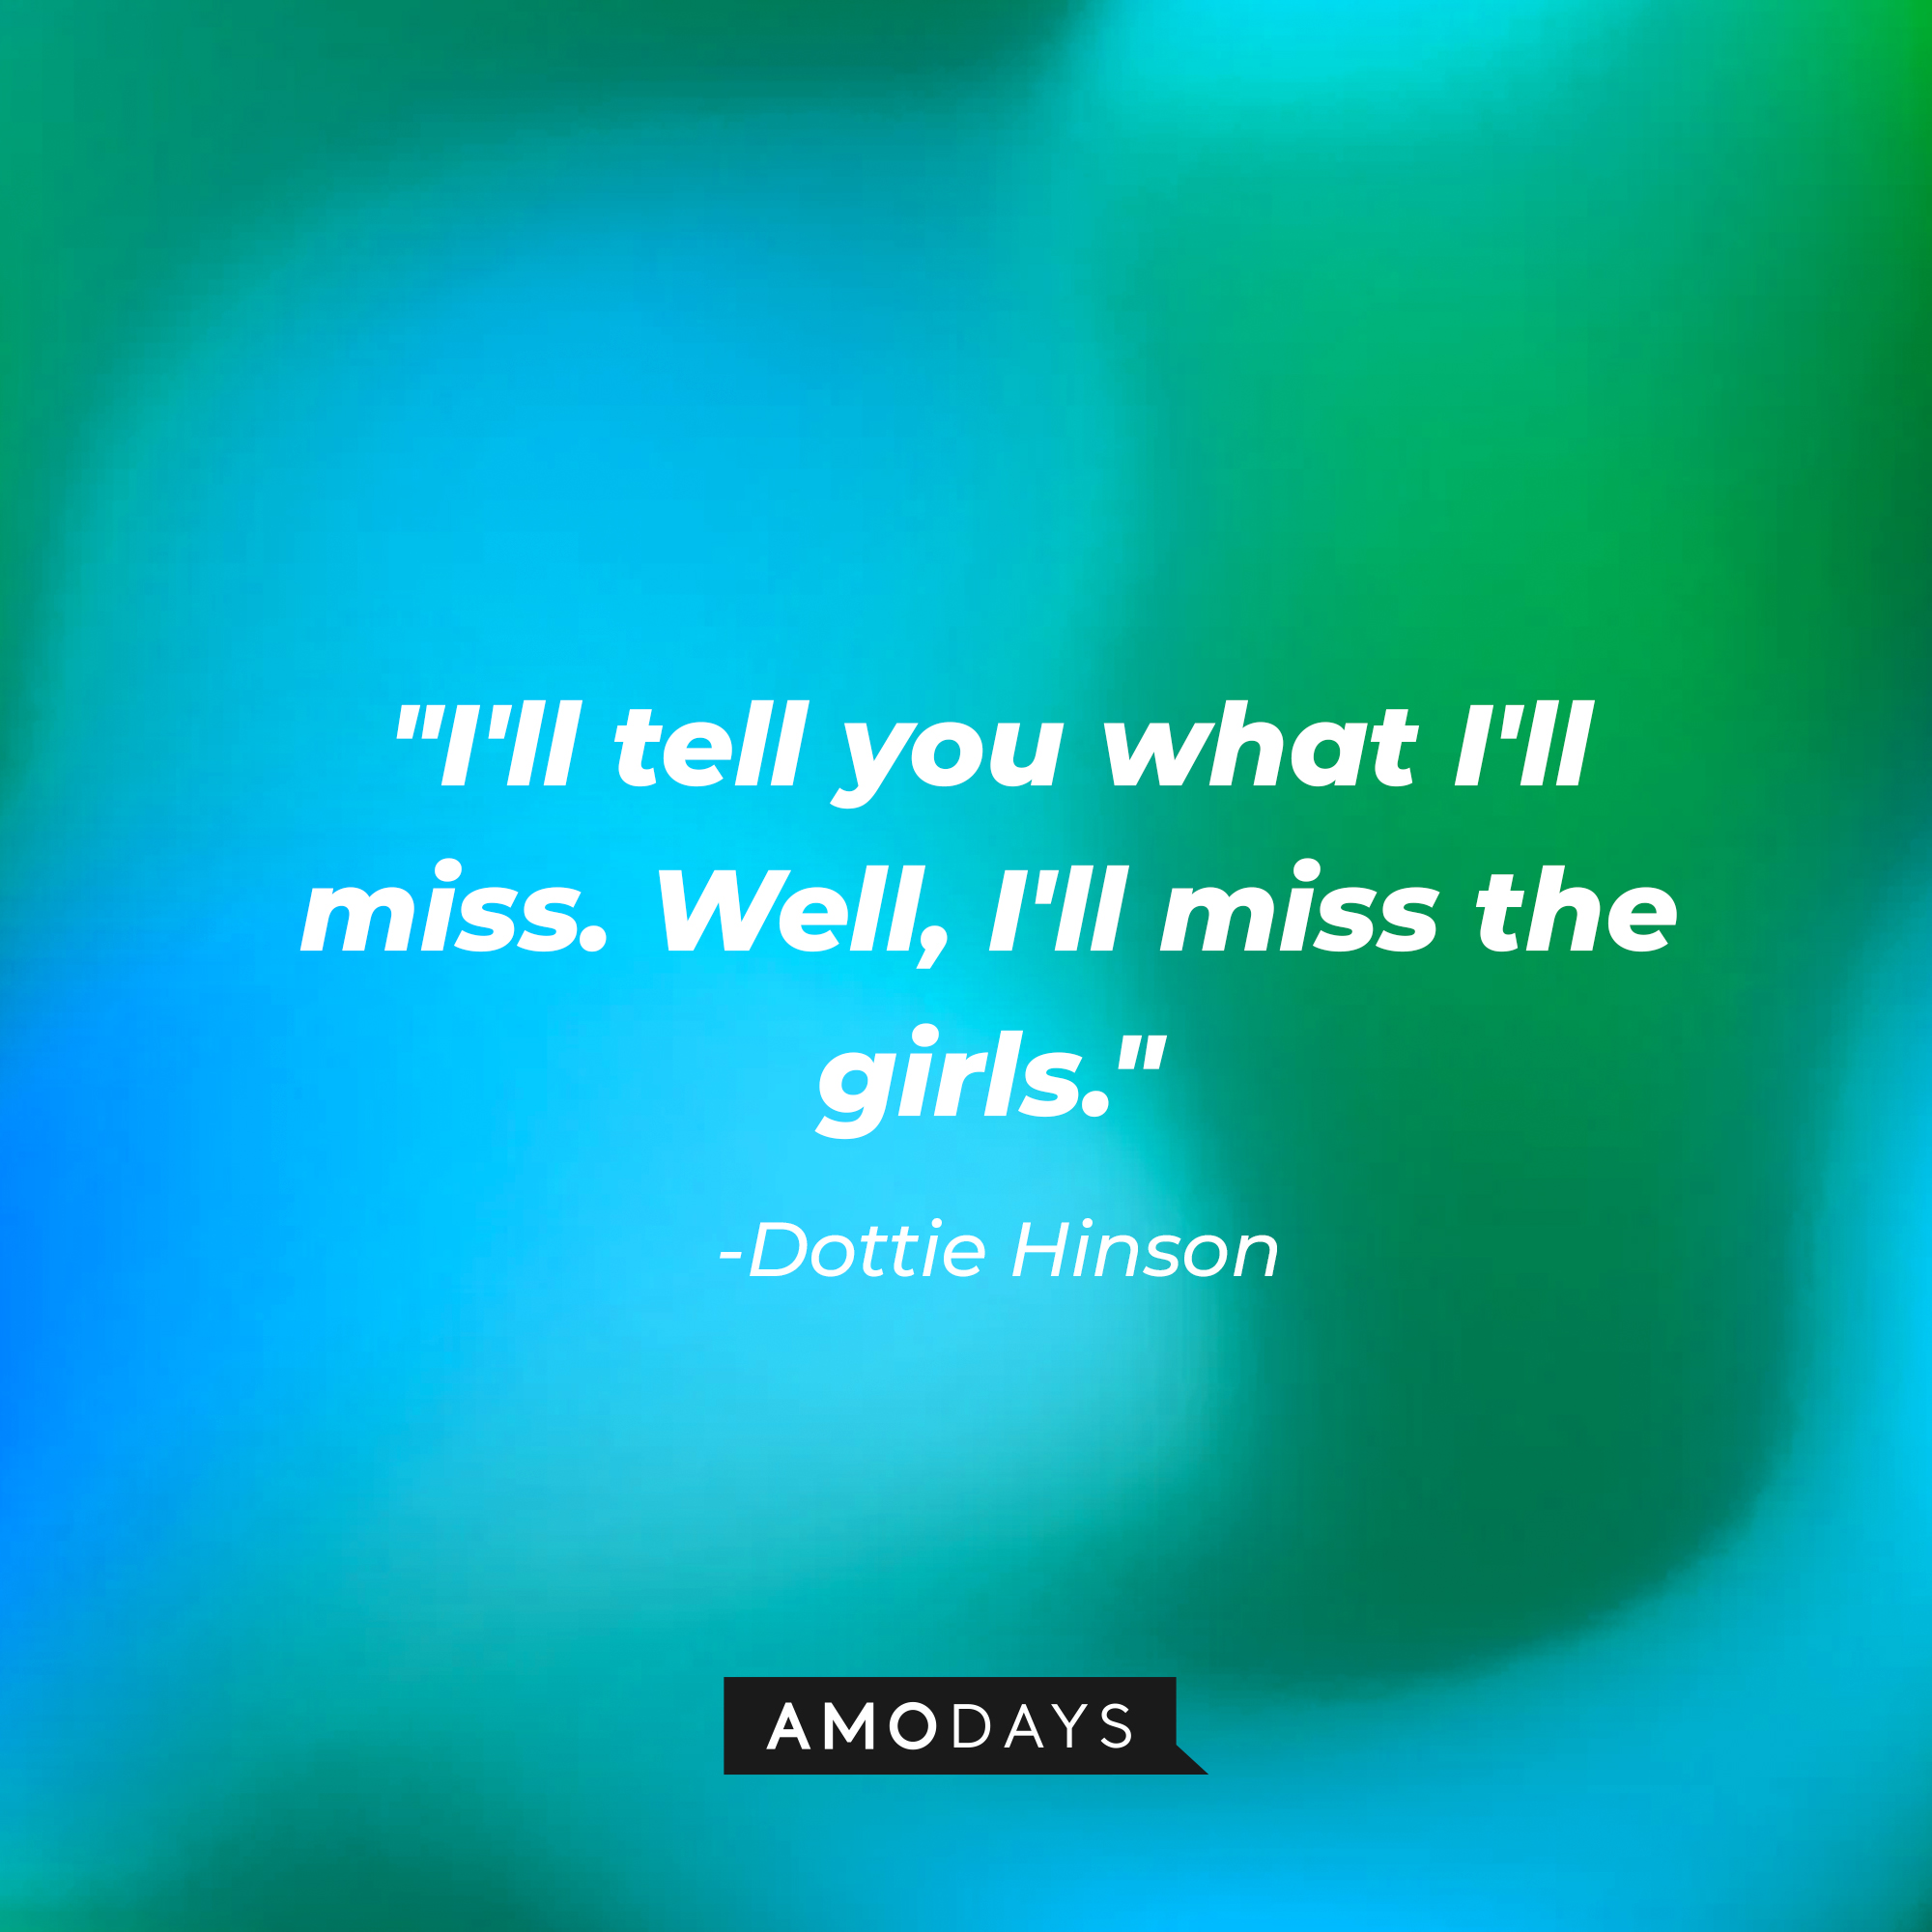 Dottie Hinson's quote: "I'll tell you what I'll miss. Well, I'll miss the girls." | Source: AmoDays